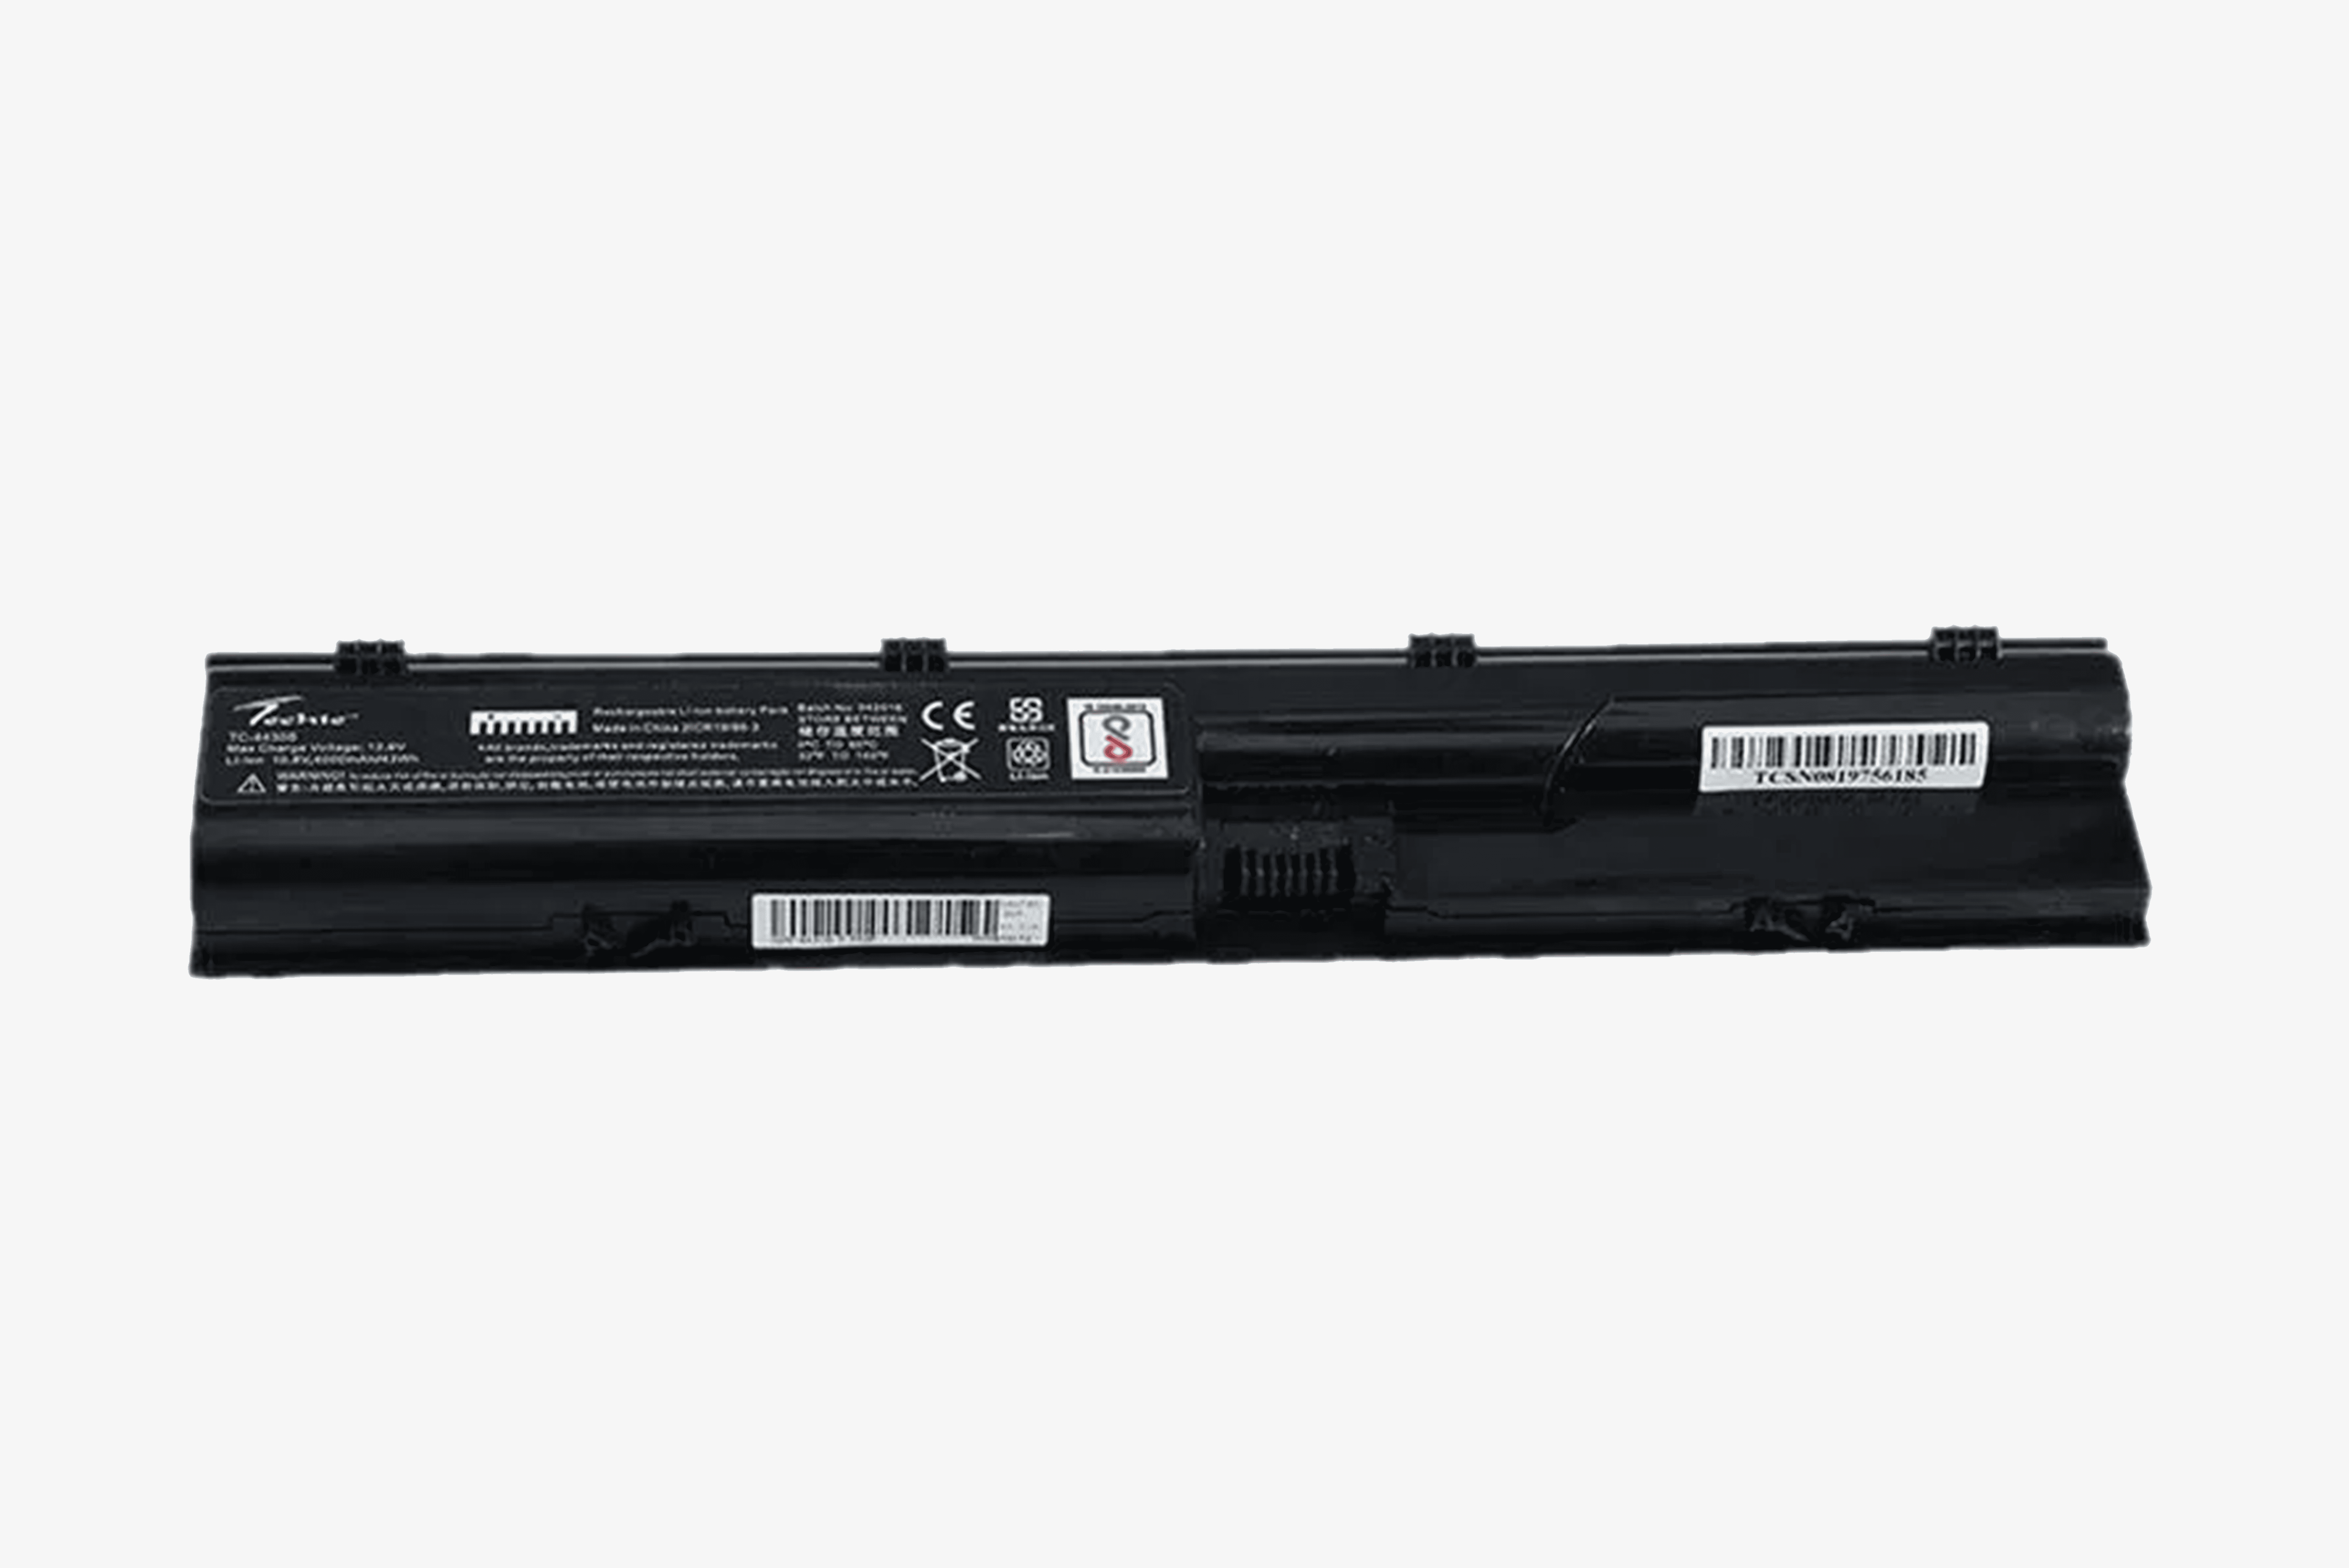 High Quality HP 4430 Battery For HP ProBook 4330s, ProBook 4331s, ProBook  4430s, ProBook 4431s, Probook 4440s Laptops.